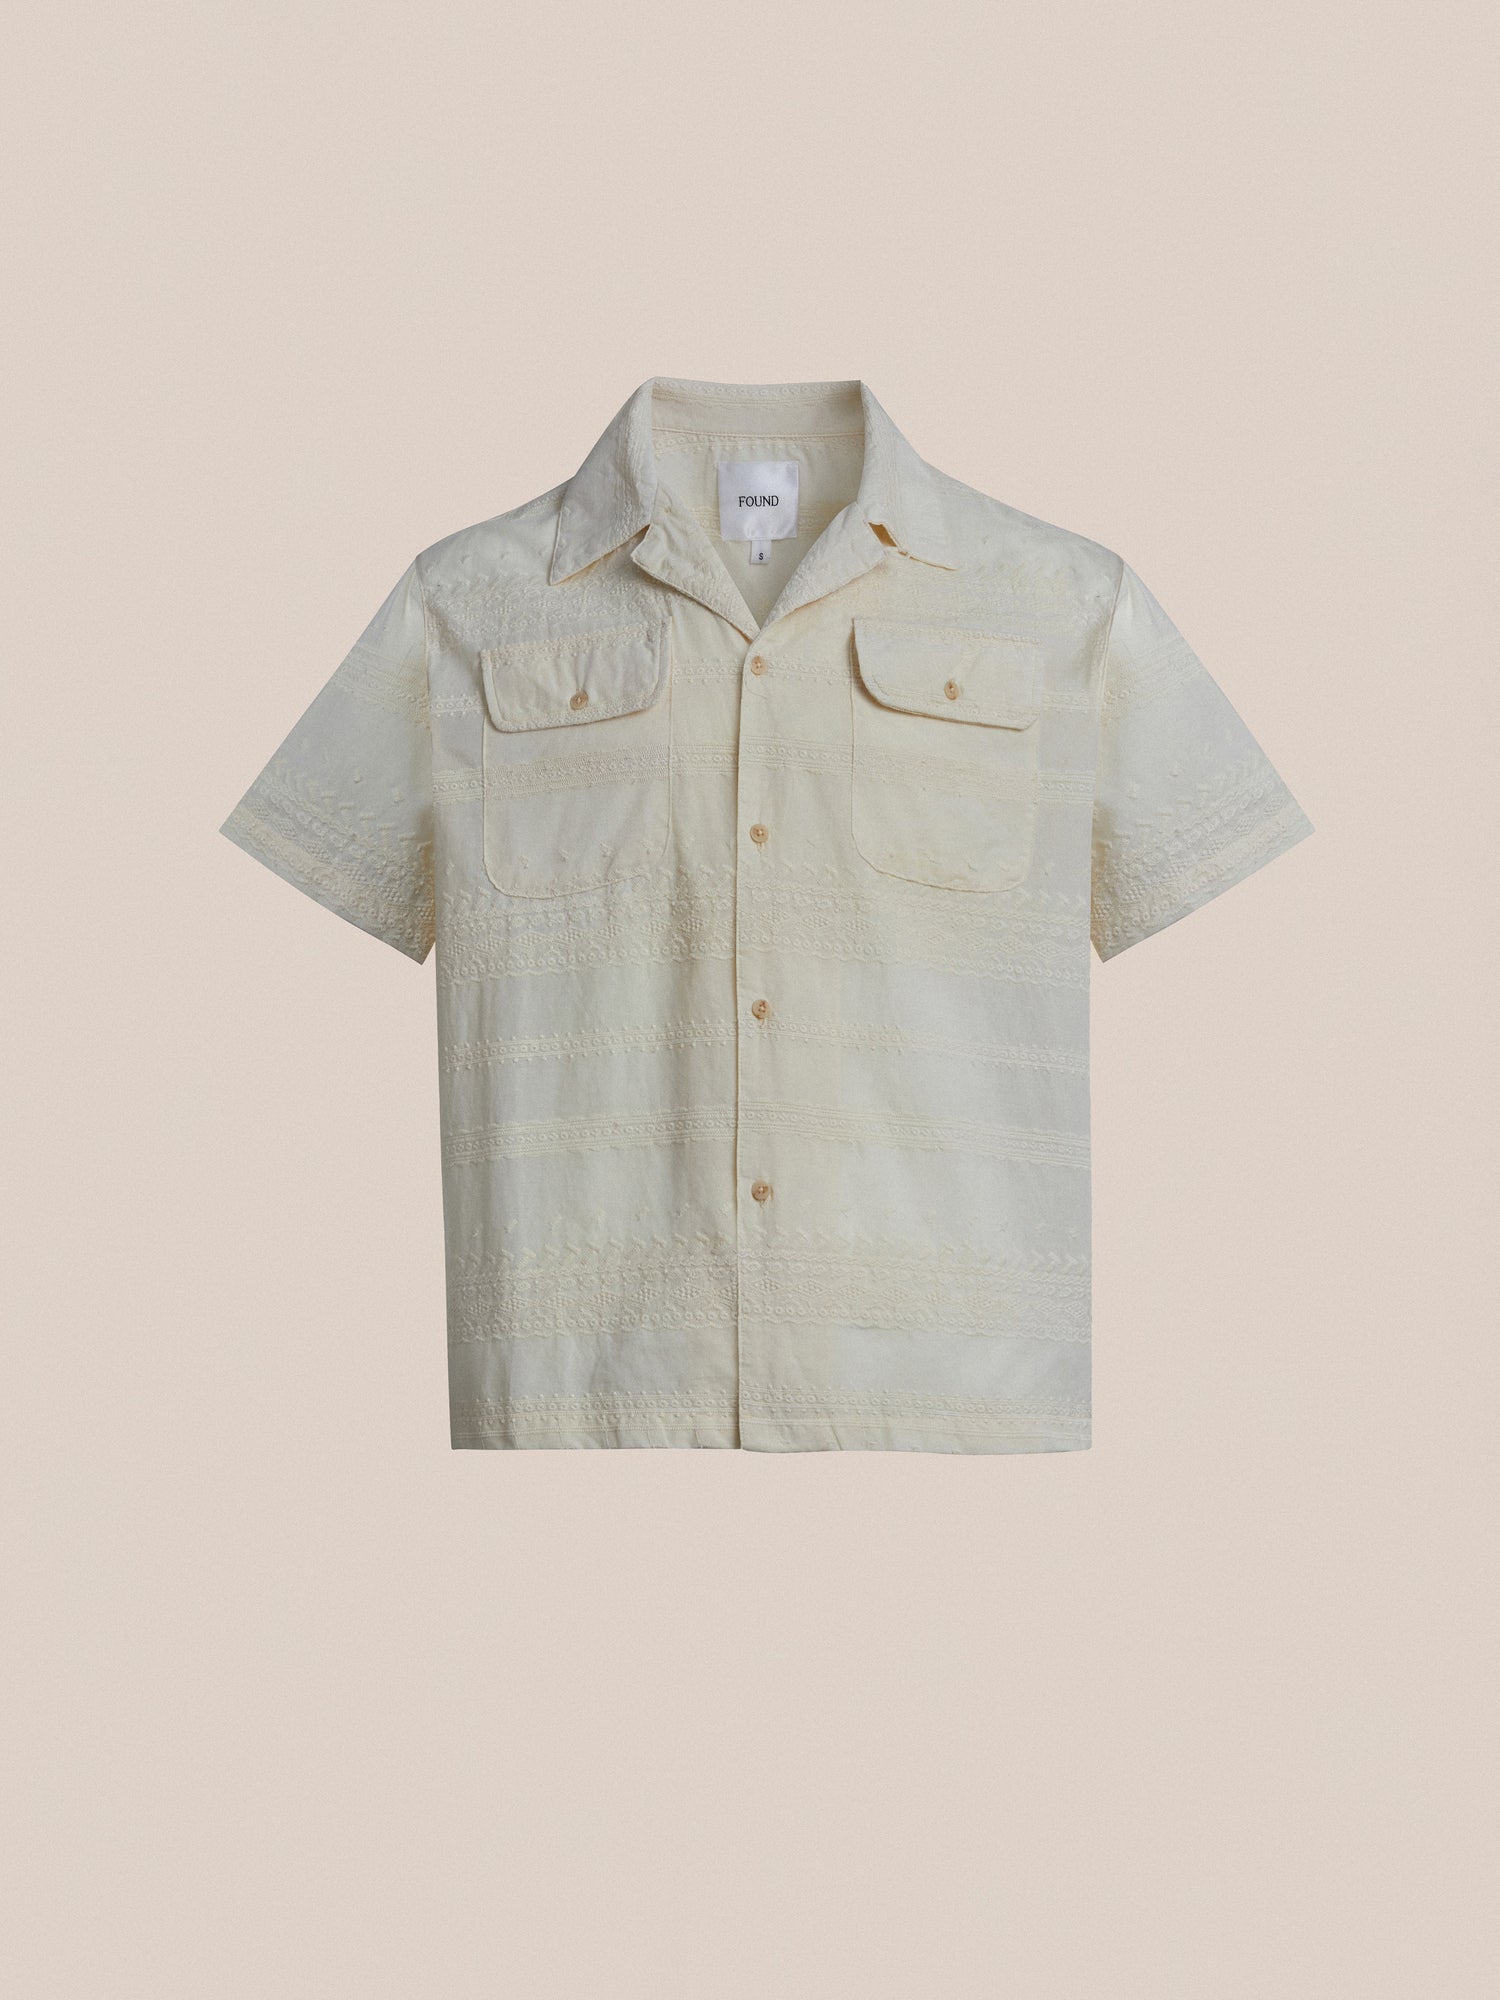 The men's short sleeve Lace SS Camp Shirt in beige from Found features delicate lace detailing.